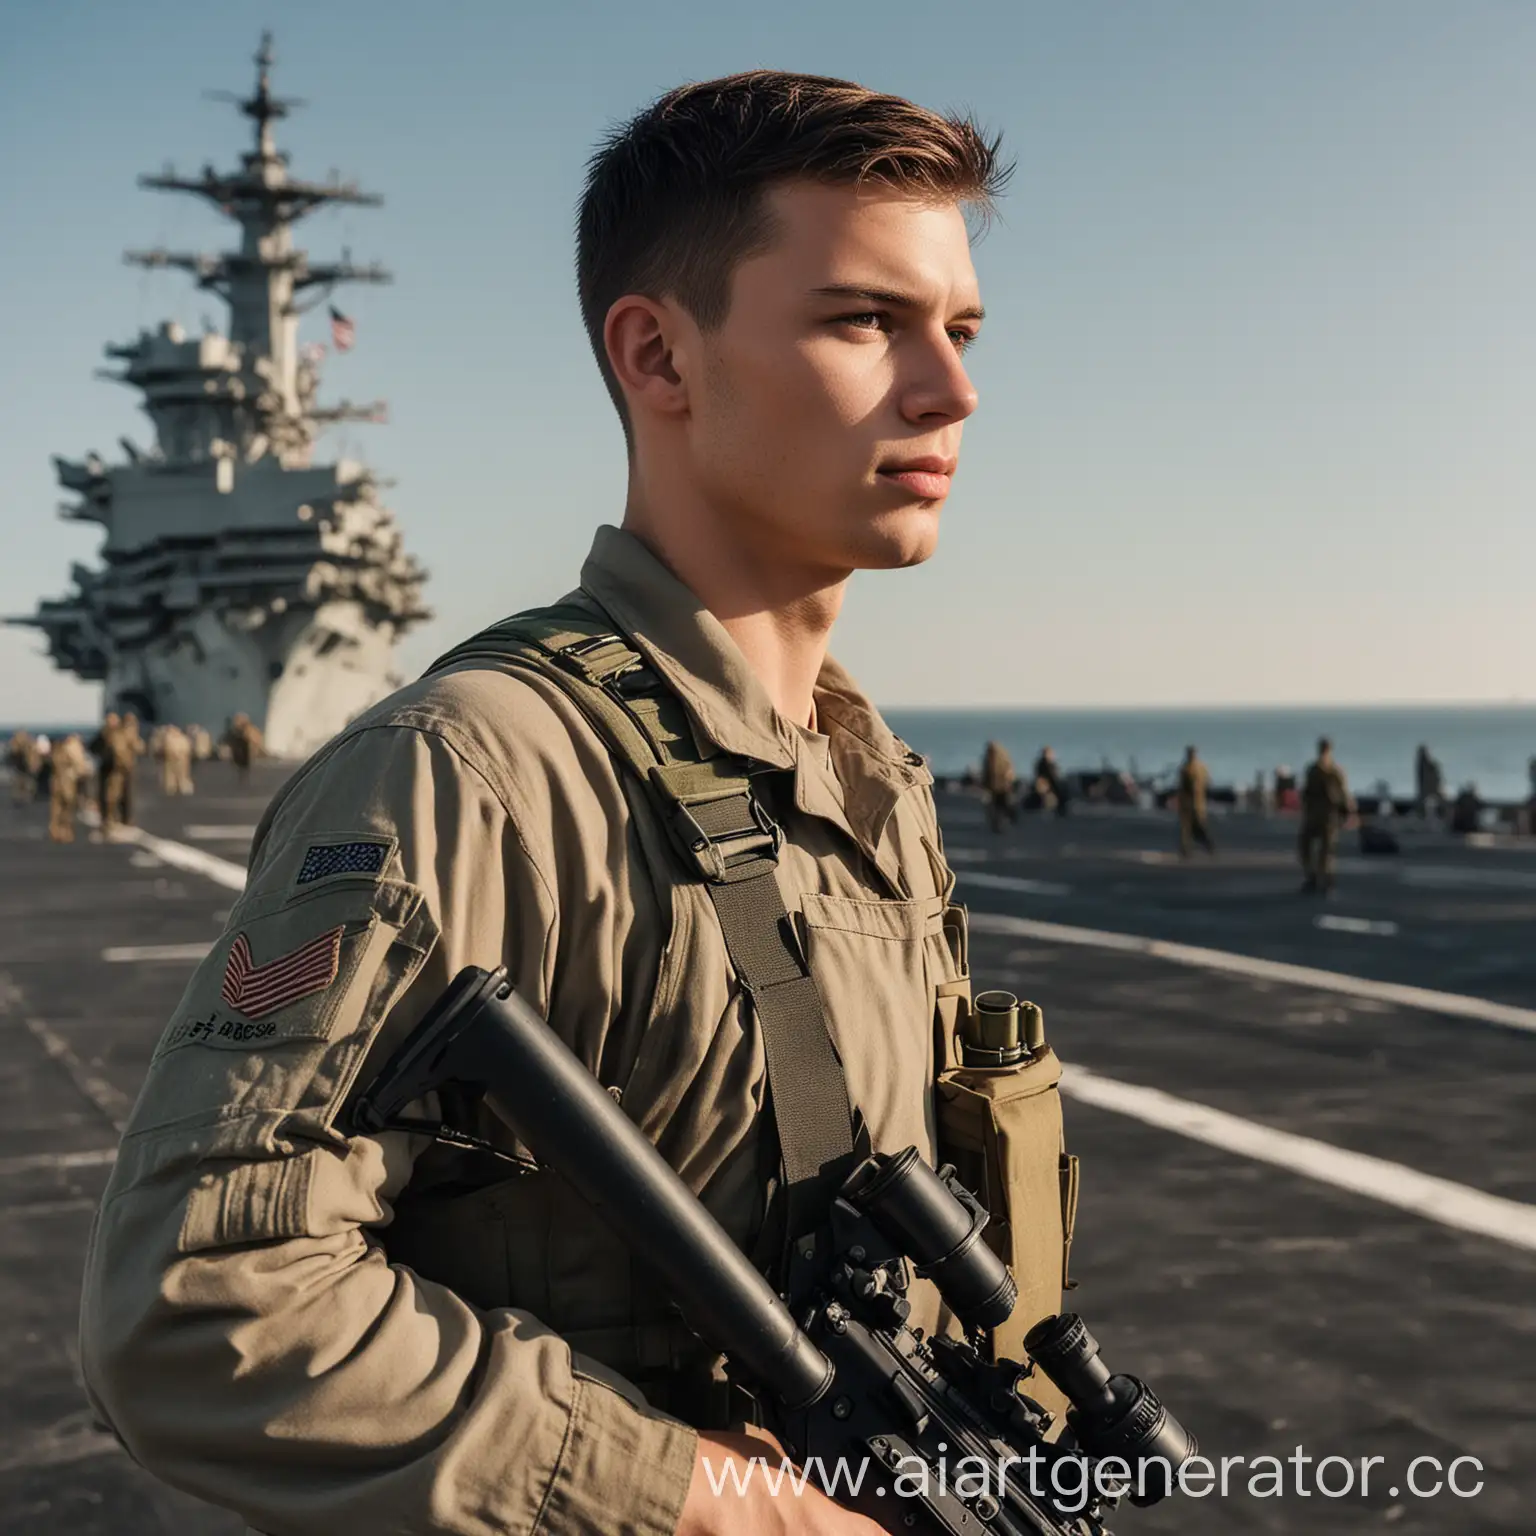 Young-Male-Soldier-Contemplating-Horizon-on-Aircraft-Carrier-Deck-with-M4-Rifle